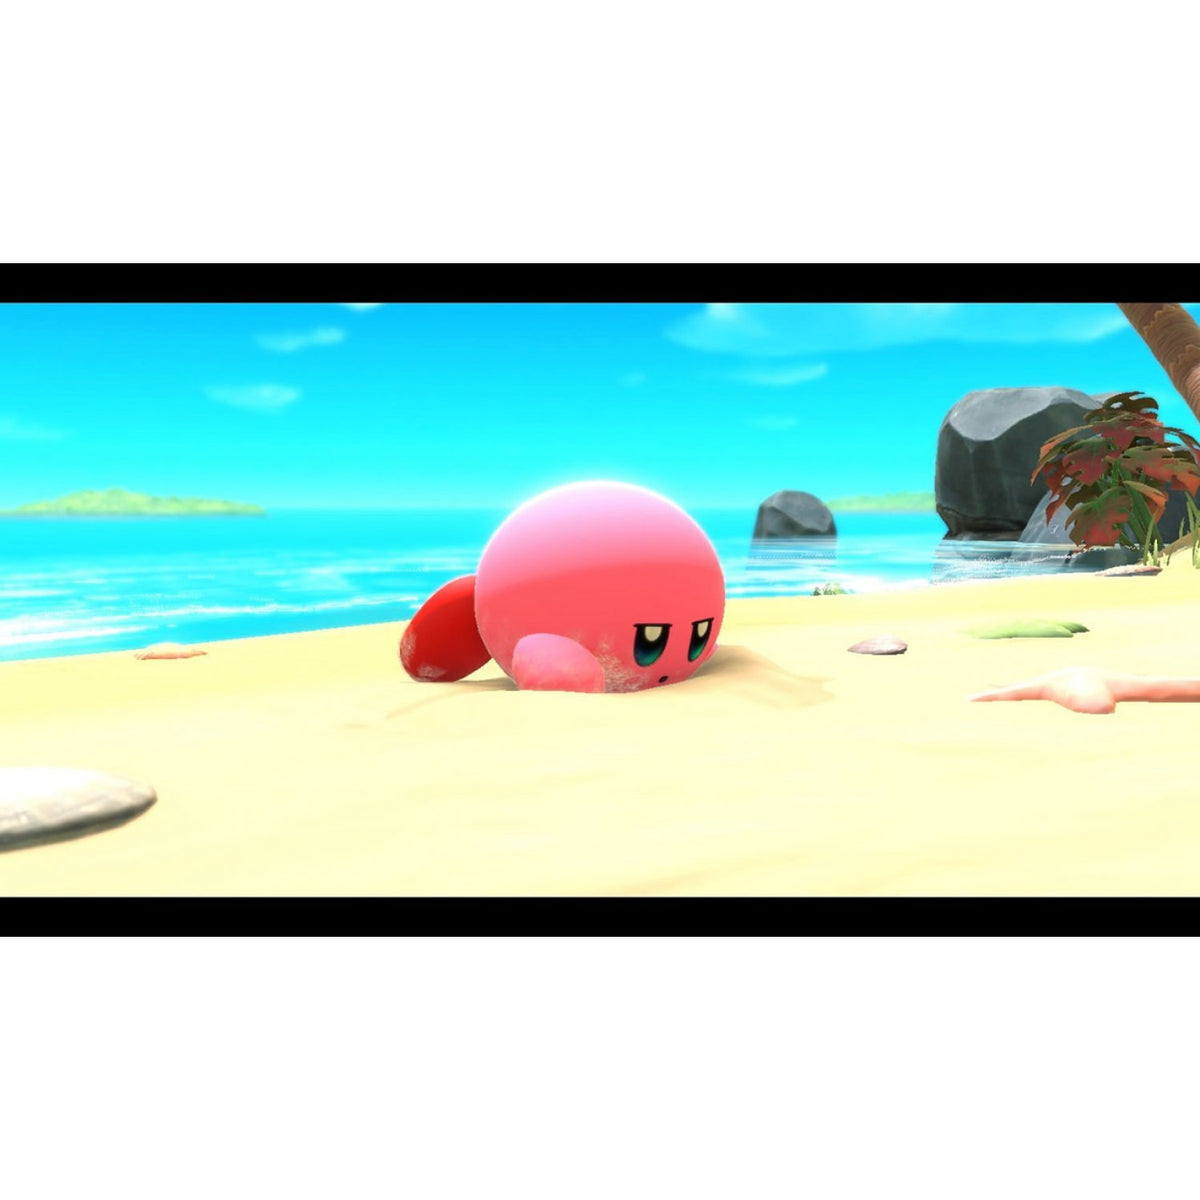 Switch Kirby and the Forgotten Land – GameStation